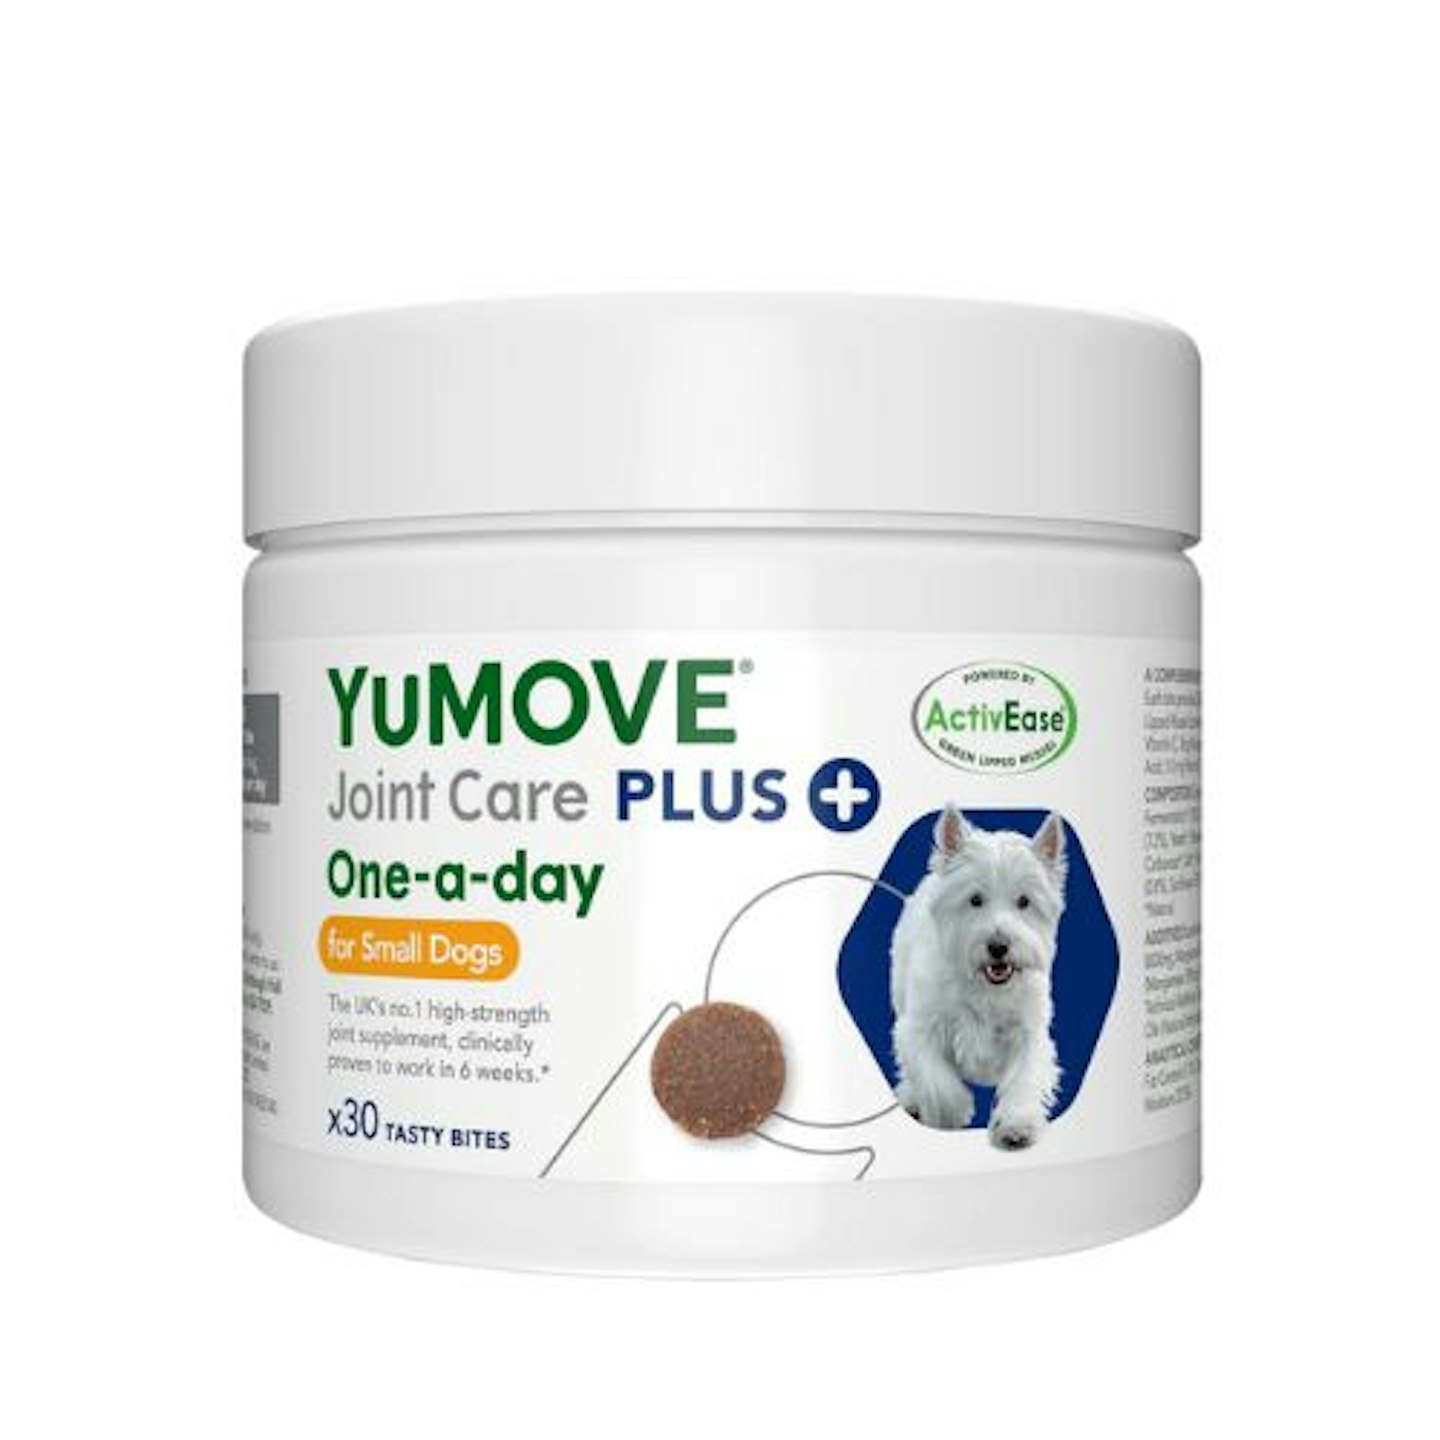 YuMOVE Joint Care Plus One-a-day